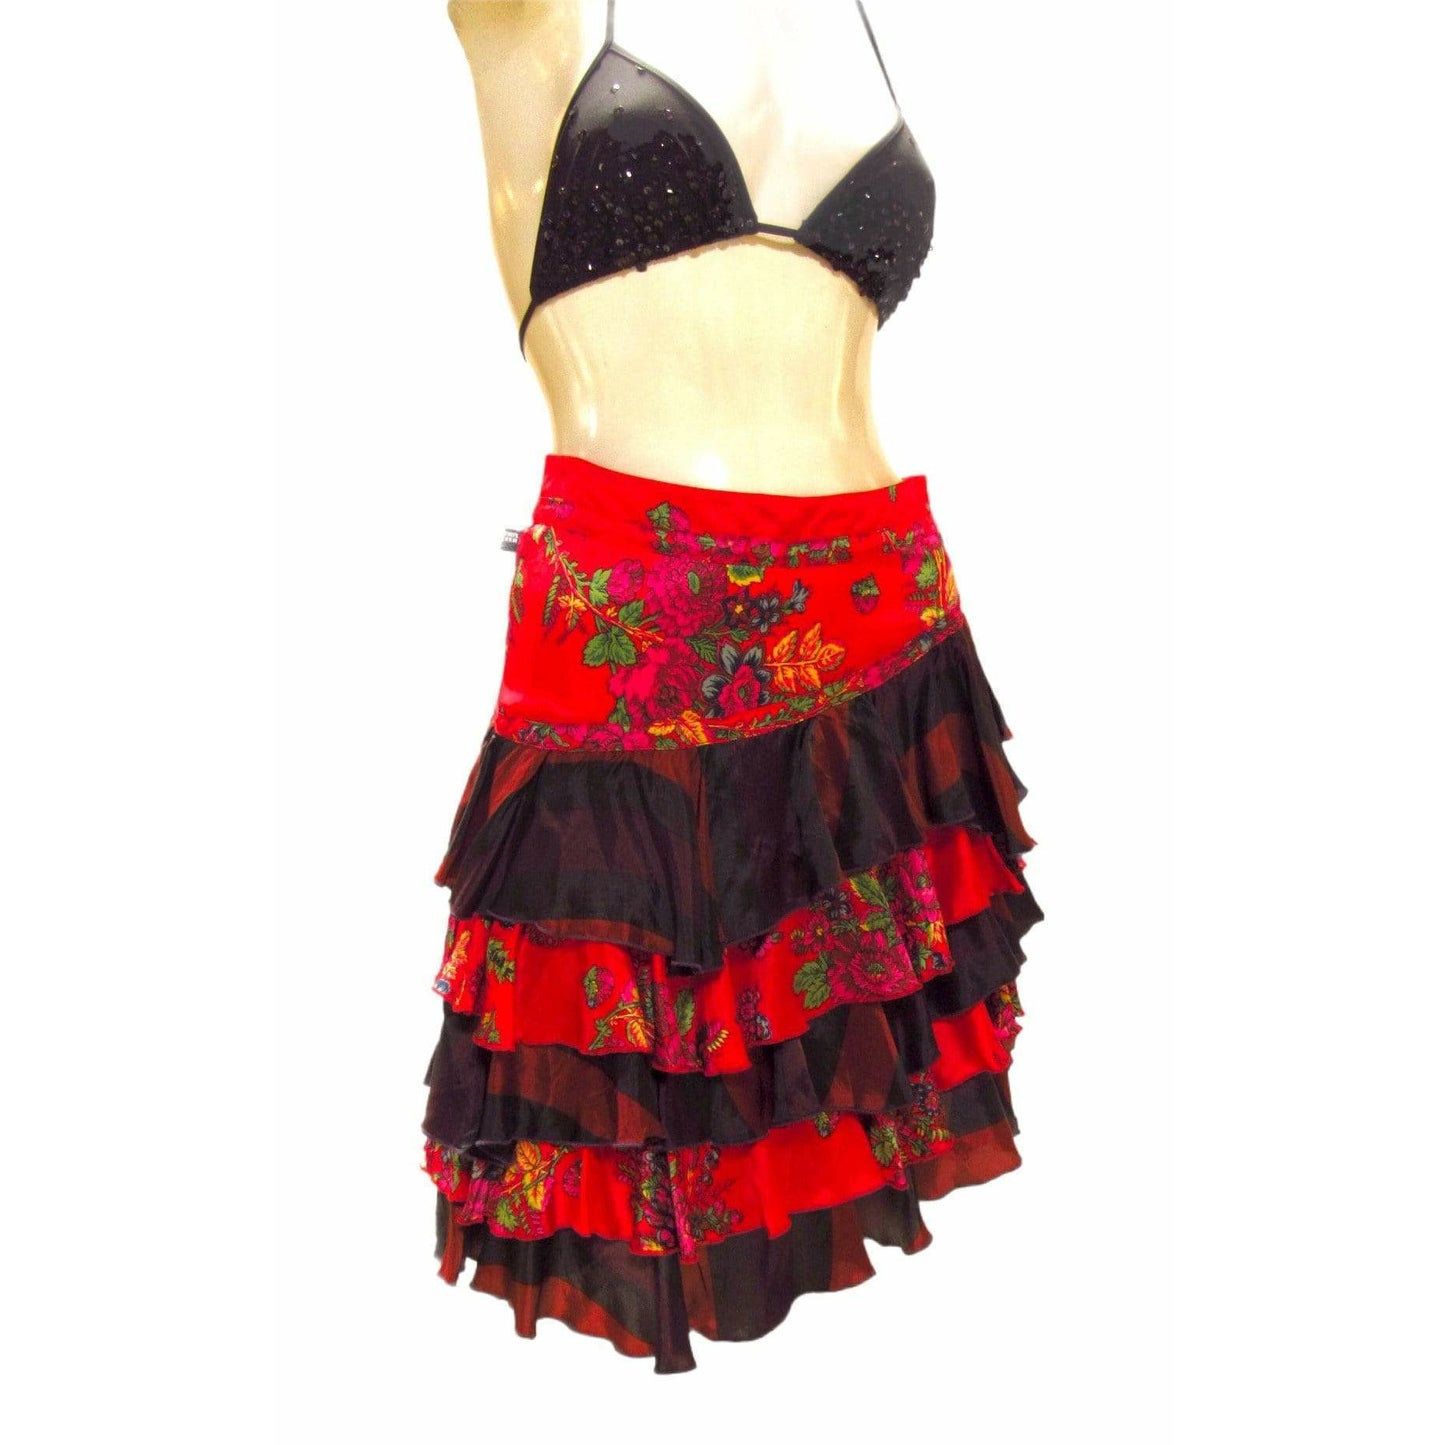 jean-paul-gaultier-floral-tiered-skirt Skirts Bisque